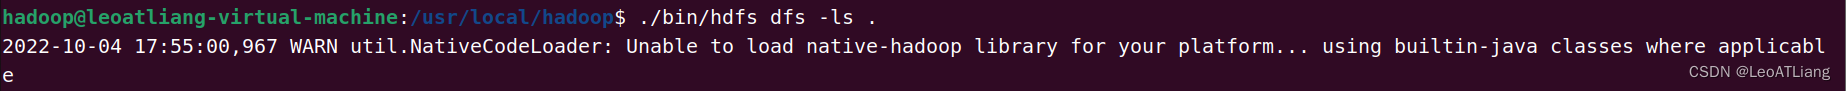 Unable to load native-hadoop library for your platform解决方法